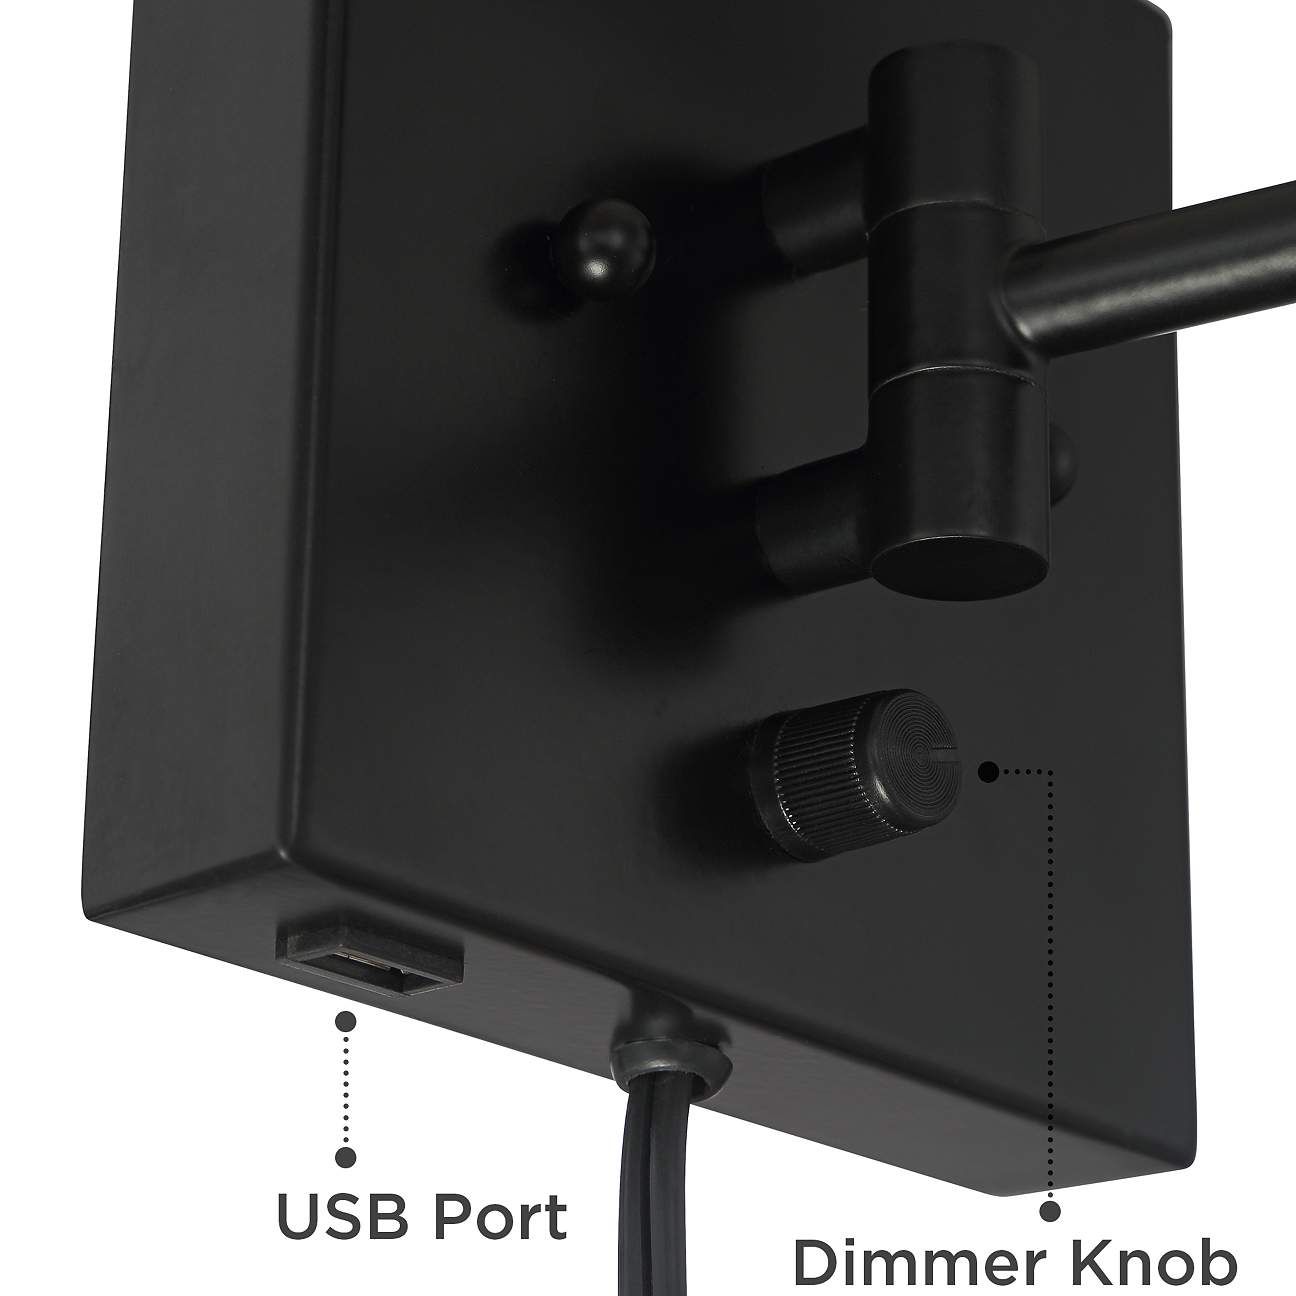 Lanett Black Plug-in Swing Arm Wall Lamps Set of 2 with USB Port - #86F56 | Lamps Plus | Lamps Plus